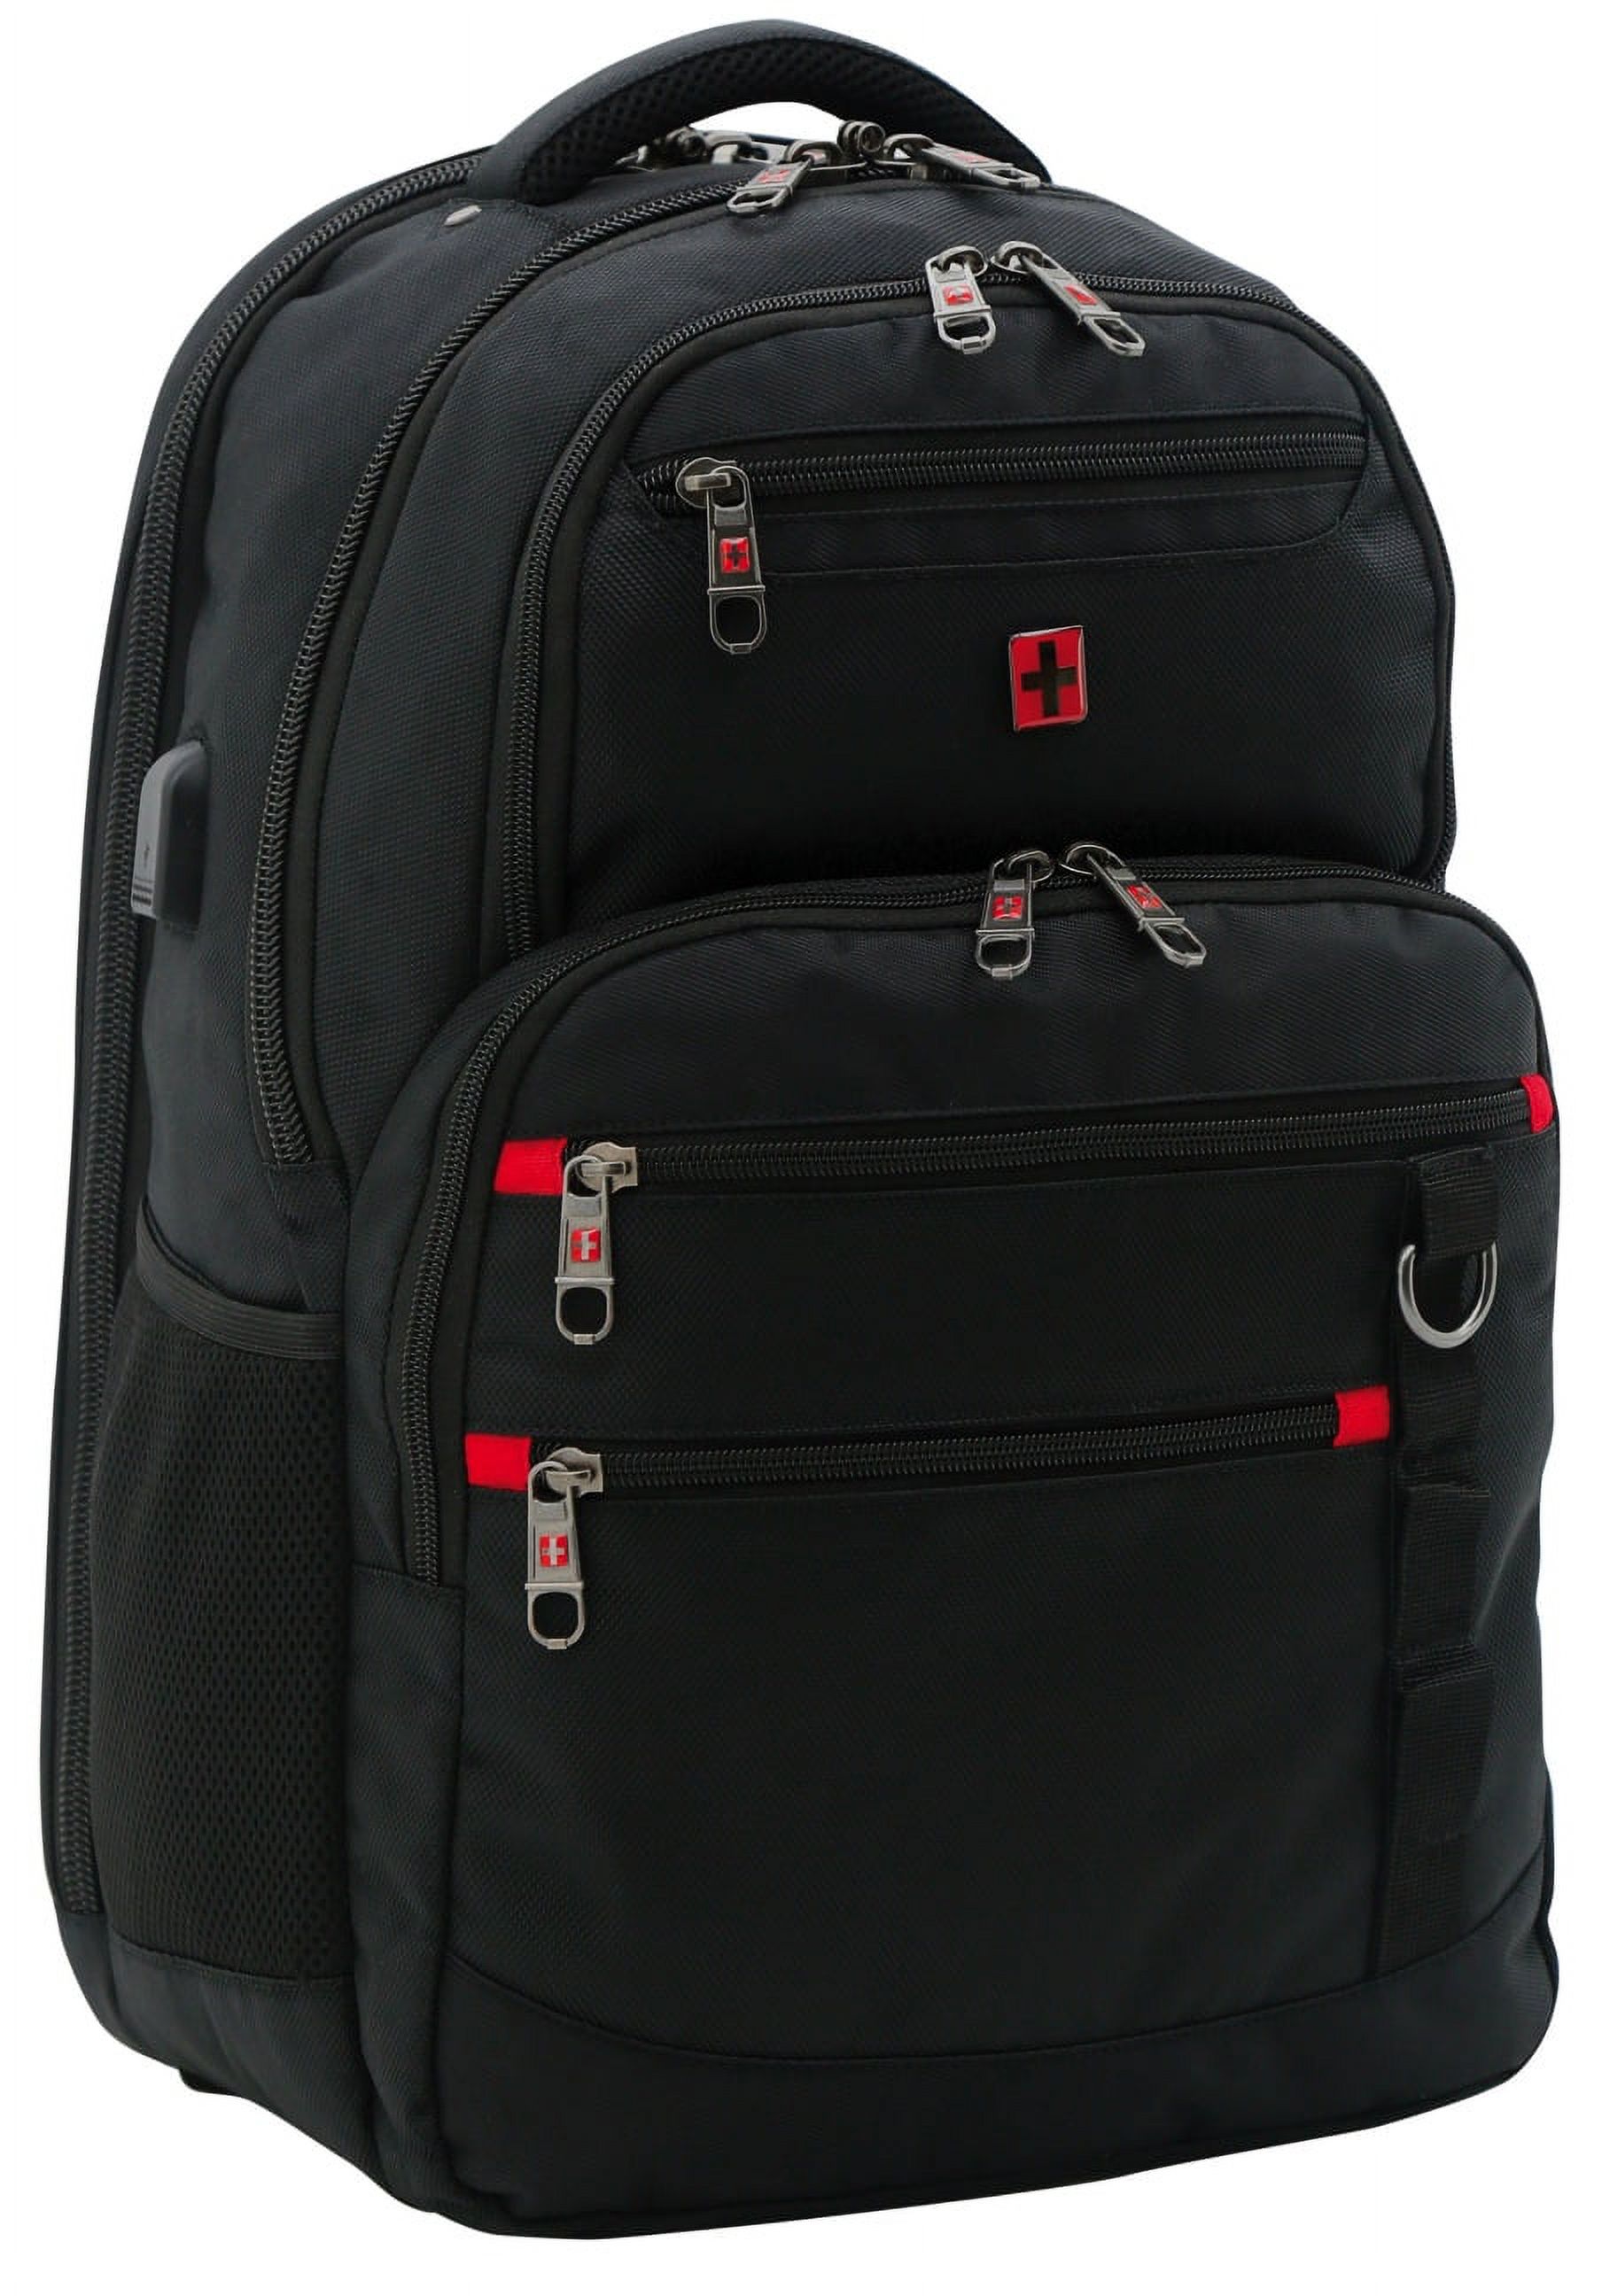 Swiss Tech Navigator Backpack with Padded Laptop Section - image 1 of 9